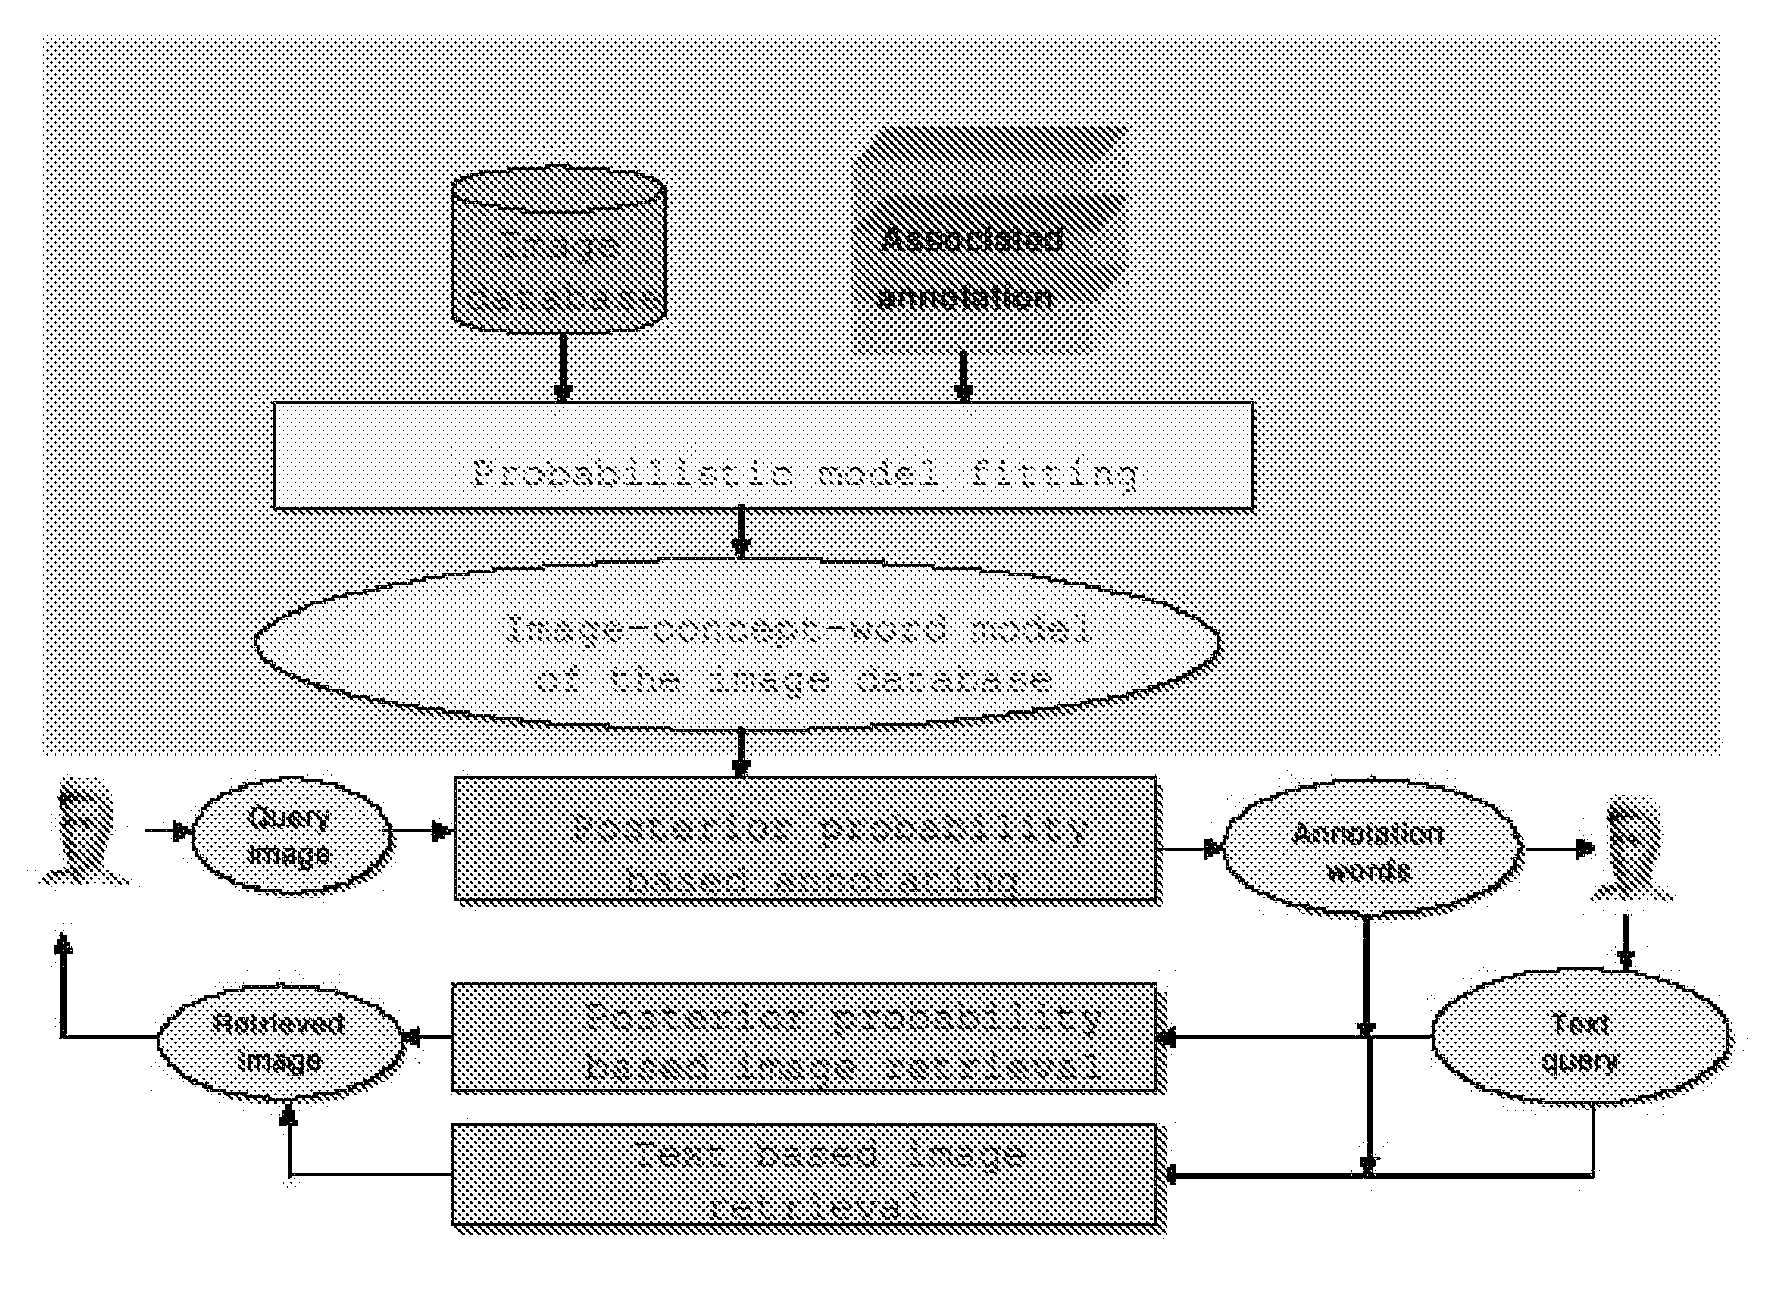 System and method for image annotation and multi-modal image retrieval using probabilistic semantic models